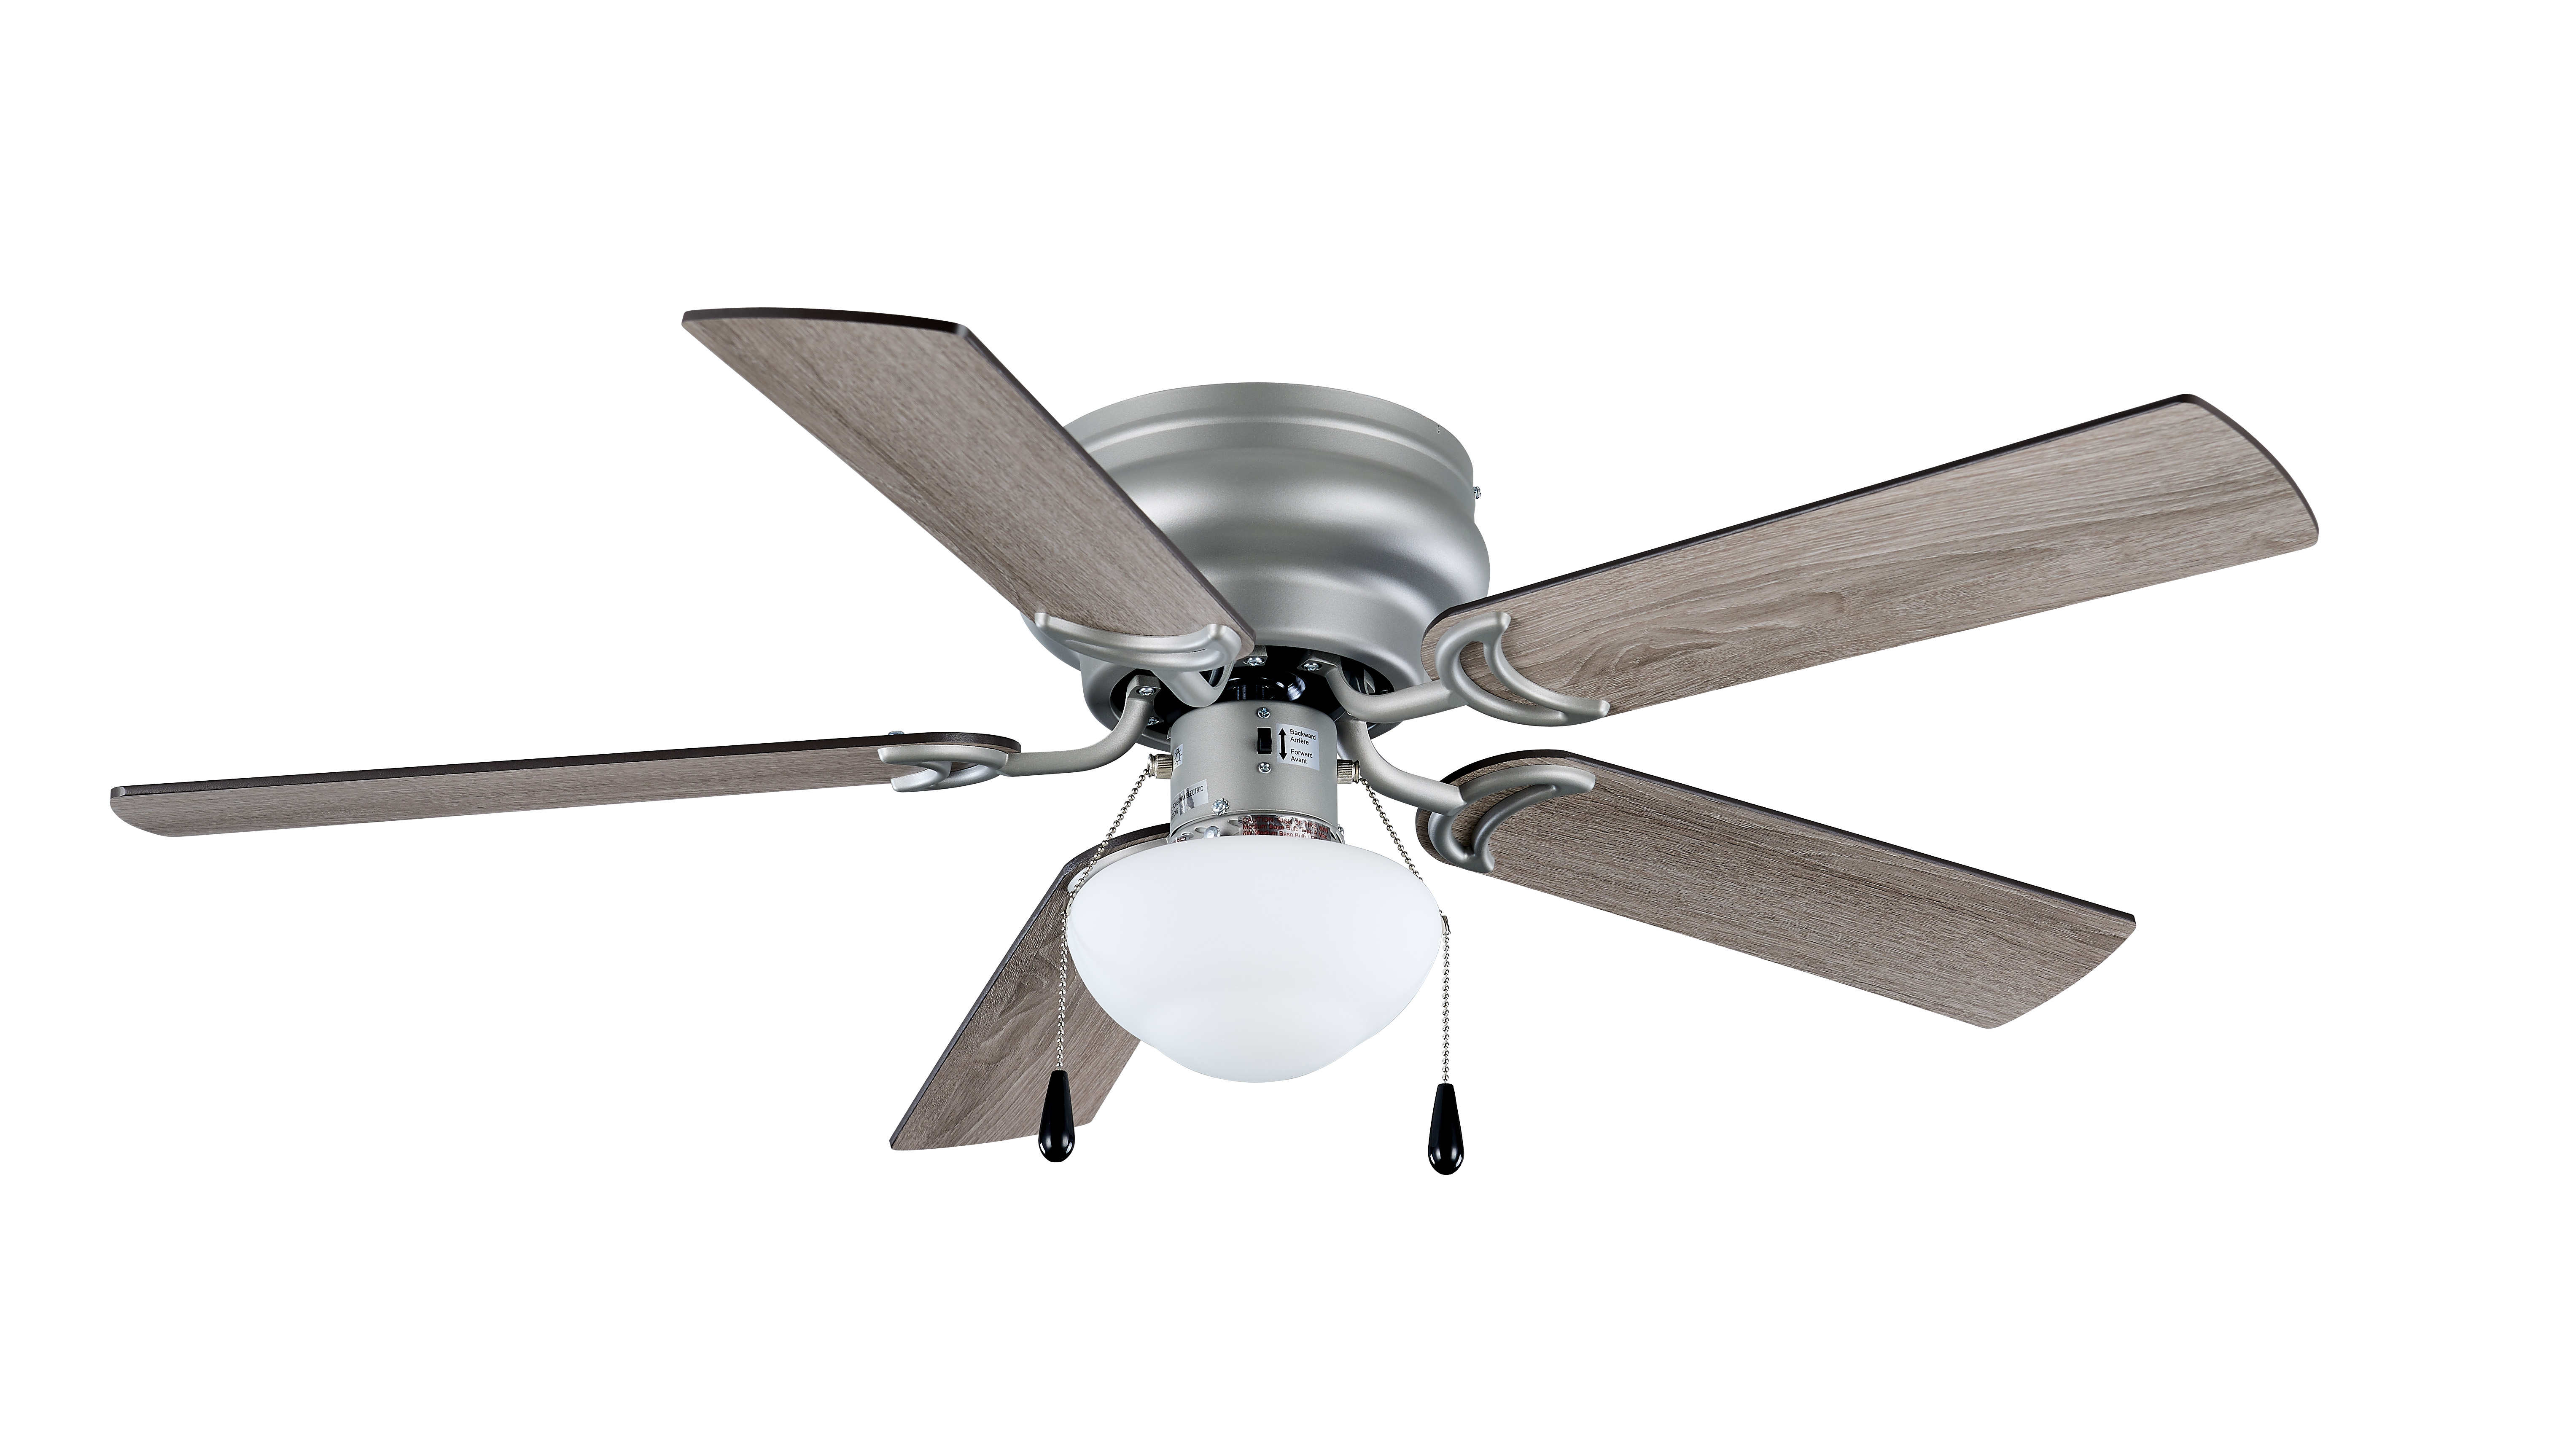 Mainstays 44" Hugger Indoor Ceiling Fan with Single Light, Satin Nickel, 5 Blades, LED, Reverse Airflow - image 4 of 8